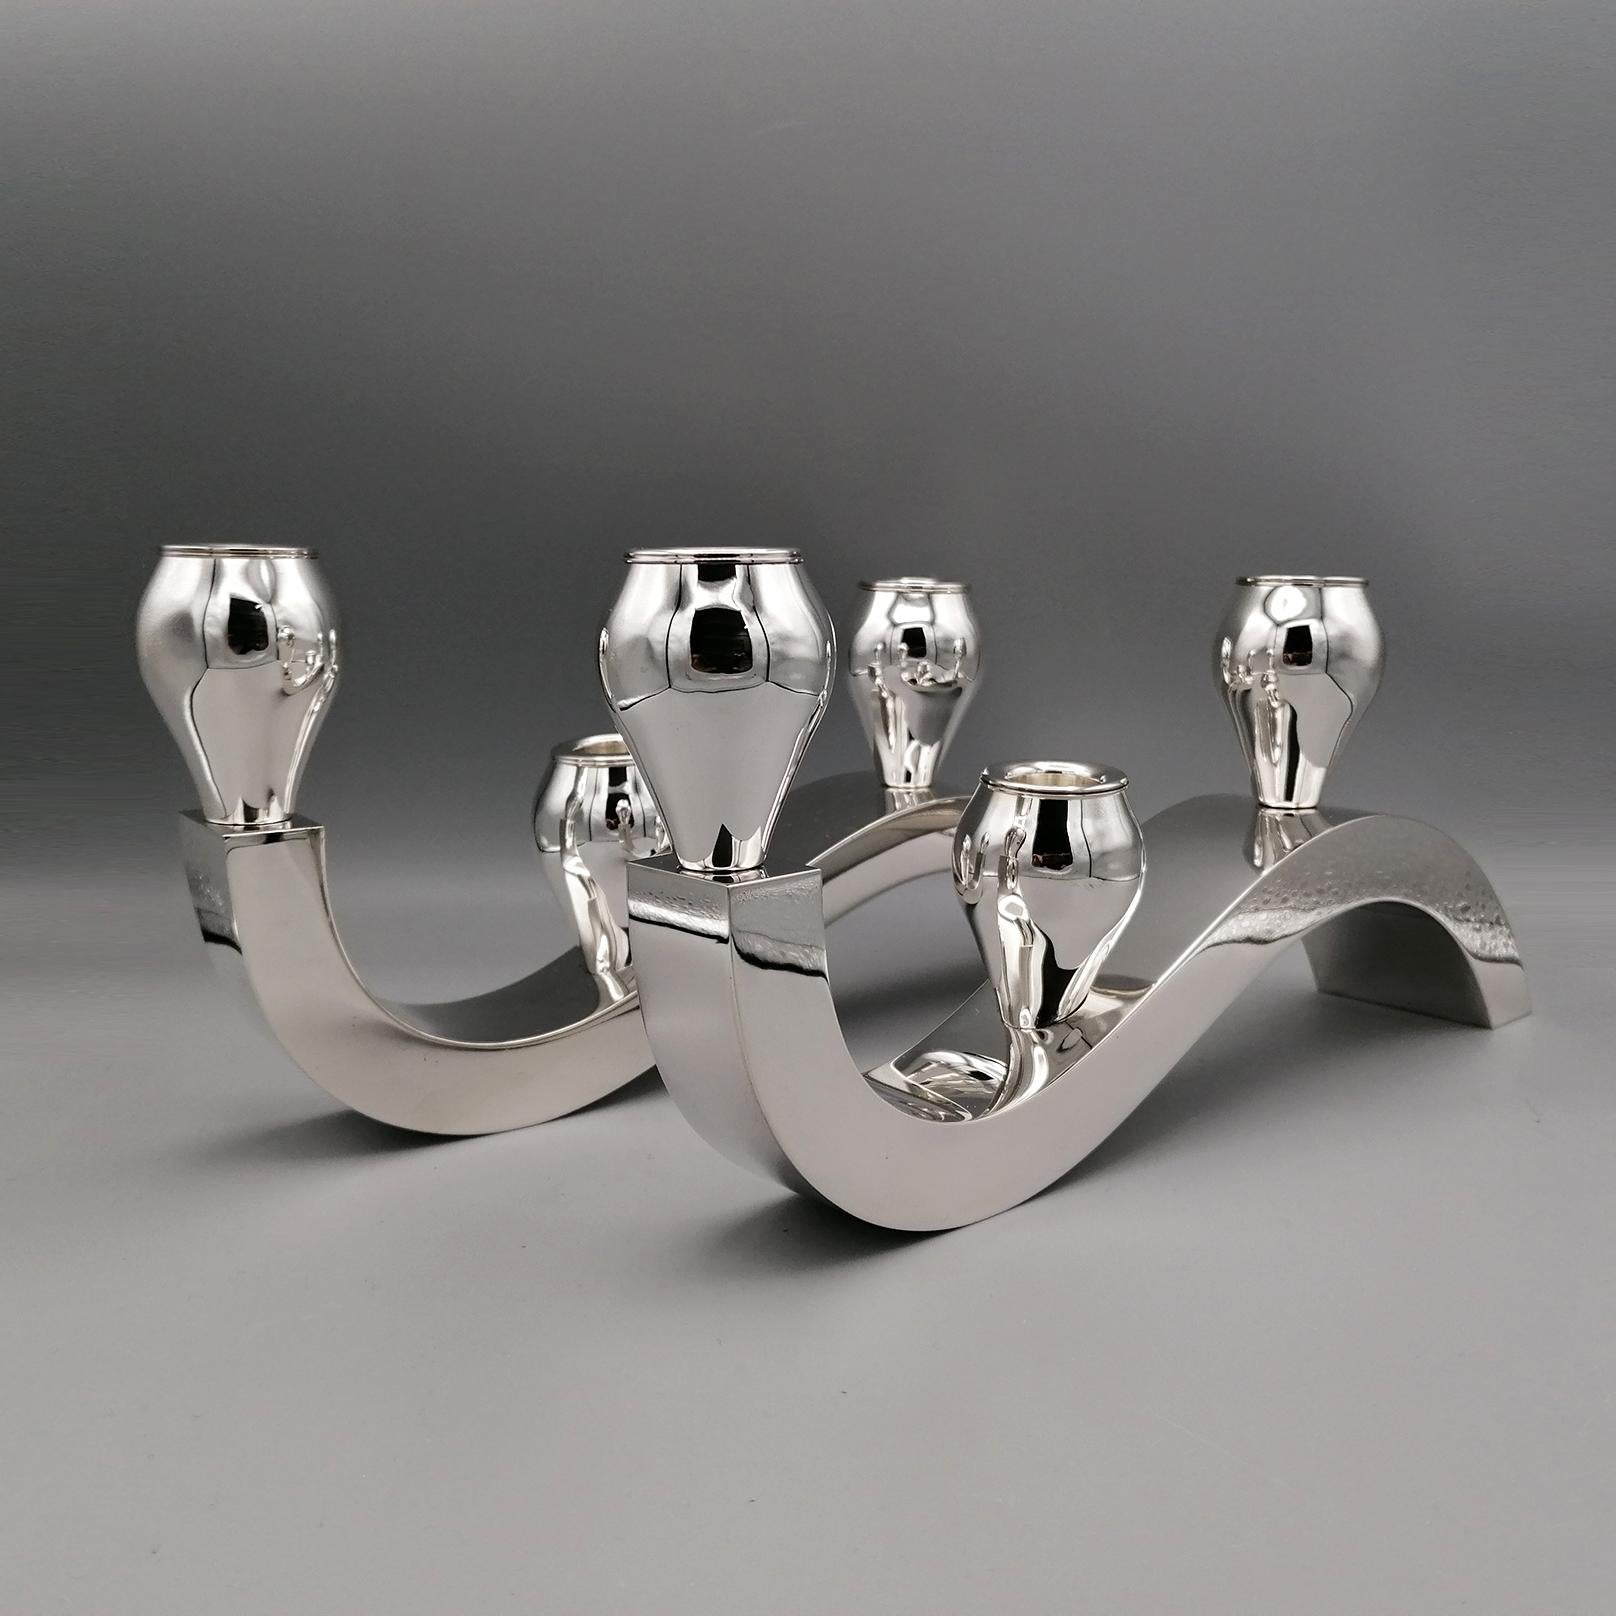 Pair of sterling silver candelabra with three lights.
The structure has been realized by a smooth sheet of silver.
The wave movement is realized with manufacturing by handmade.
On the top three rounds candle-holders are placed to complete the